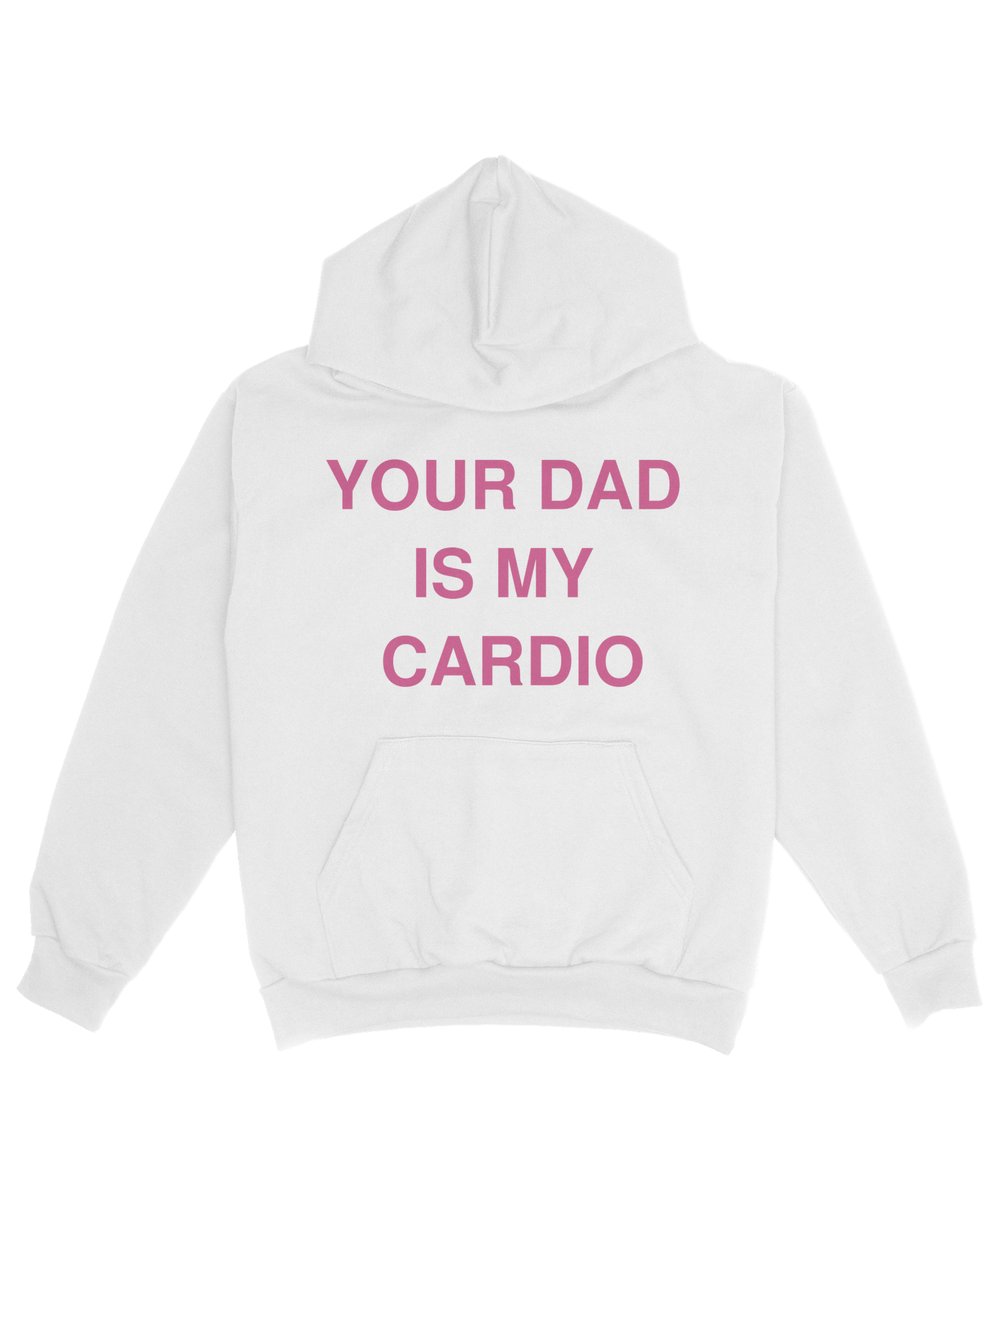 YOUR DAD IS MY CARDIO OVERSIZE HOODIE